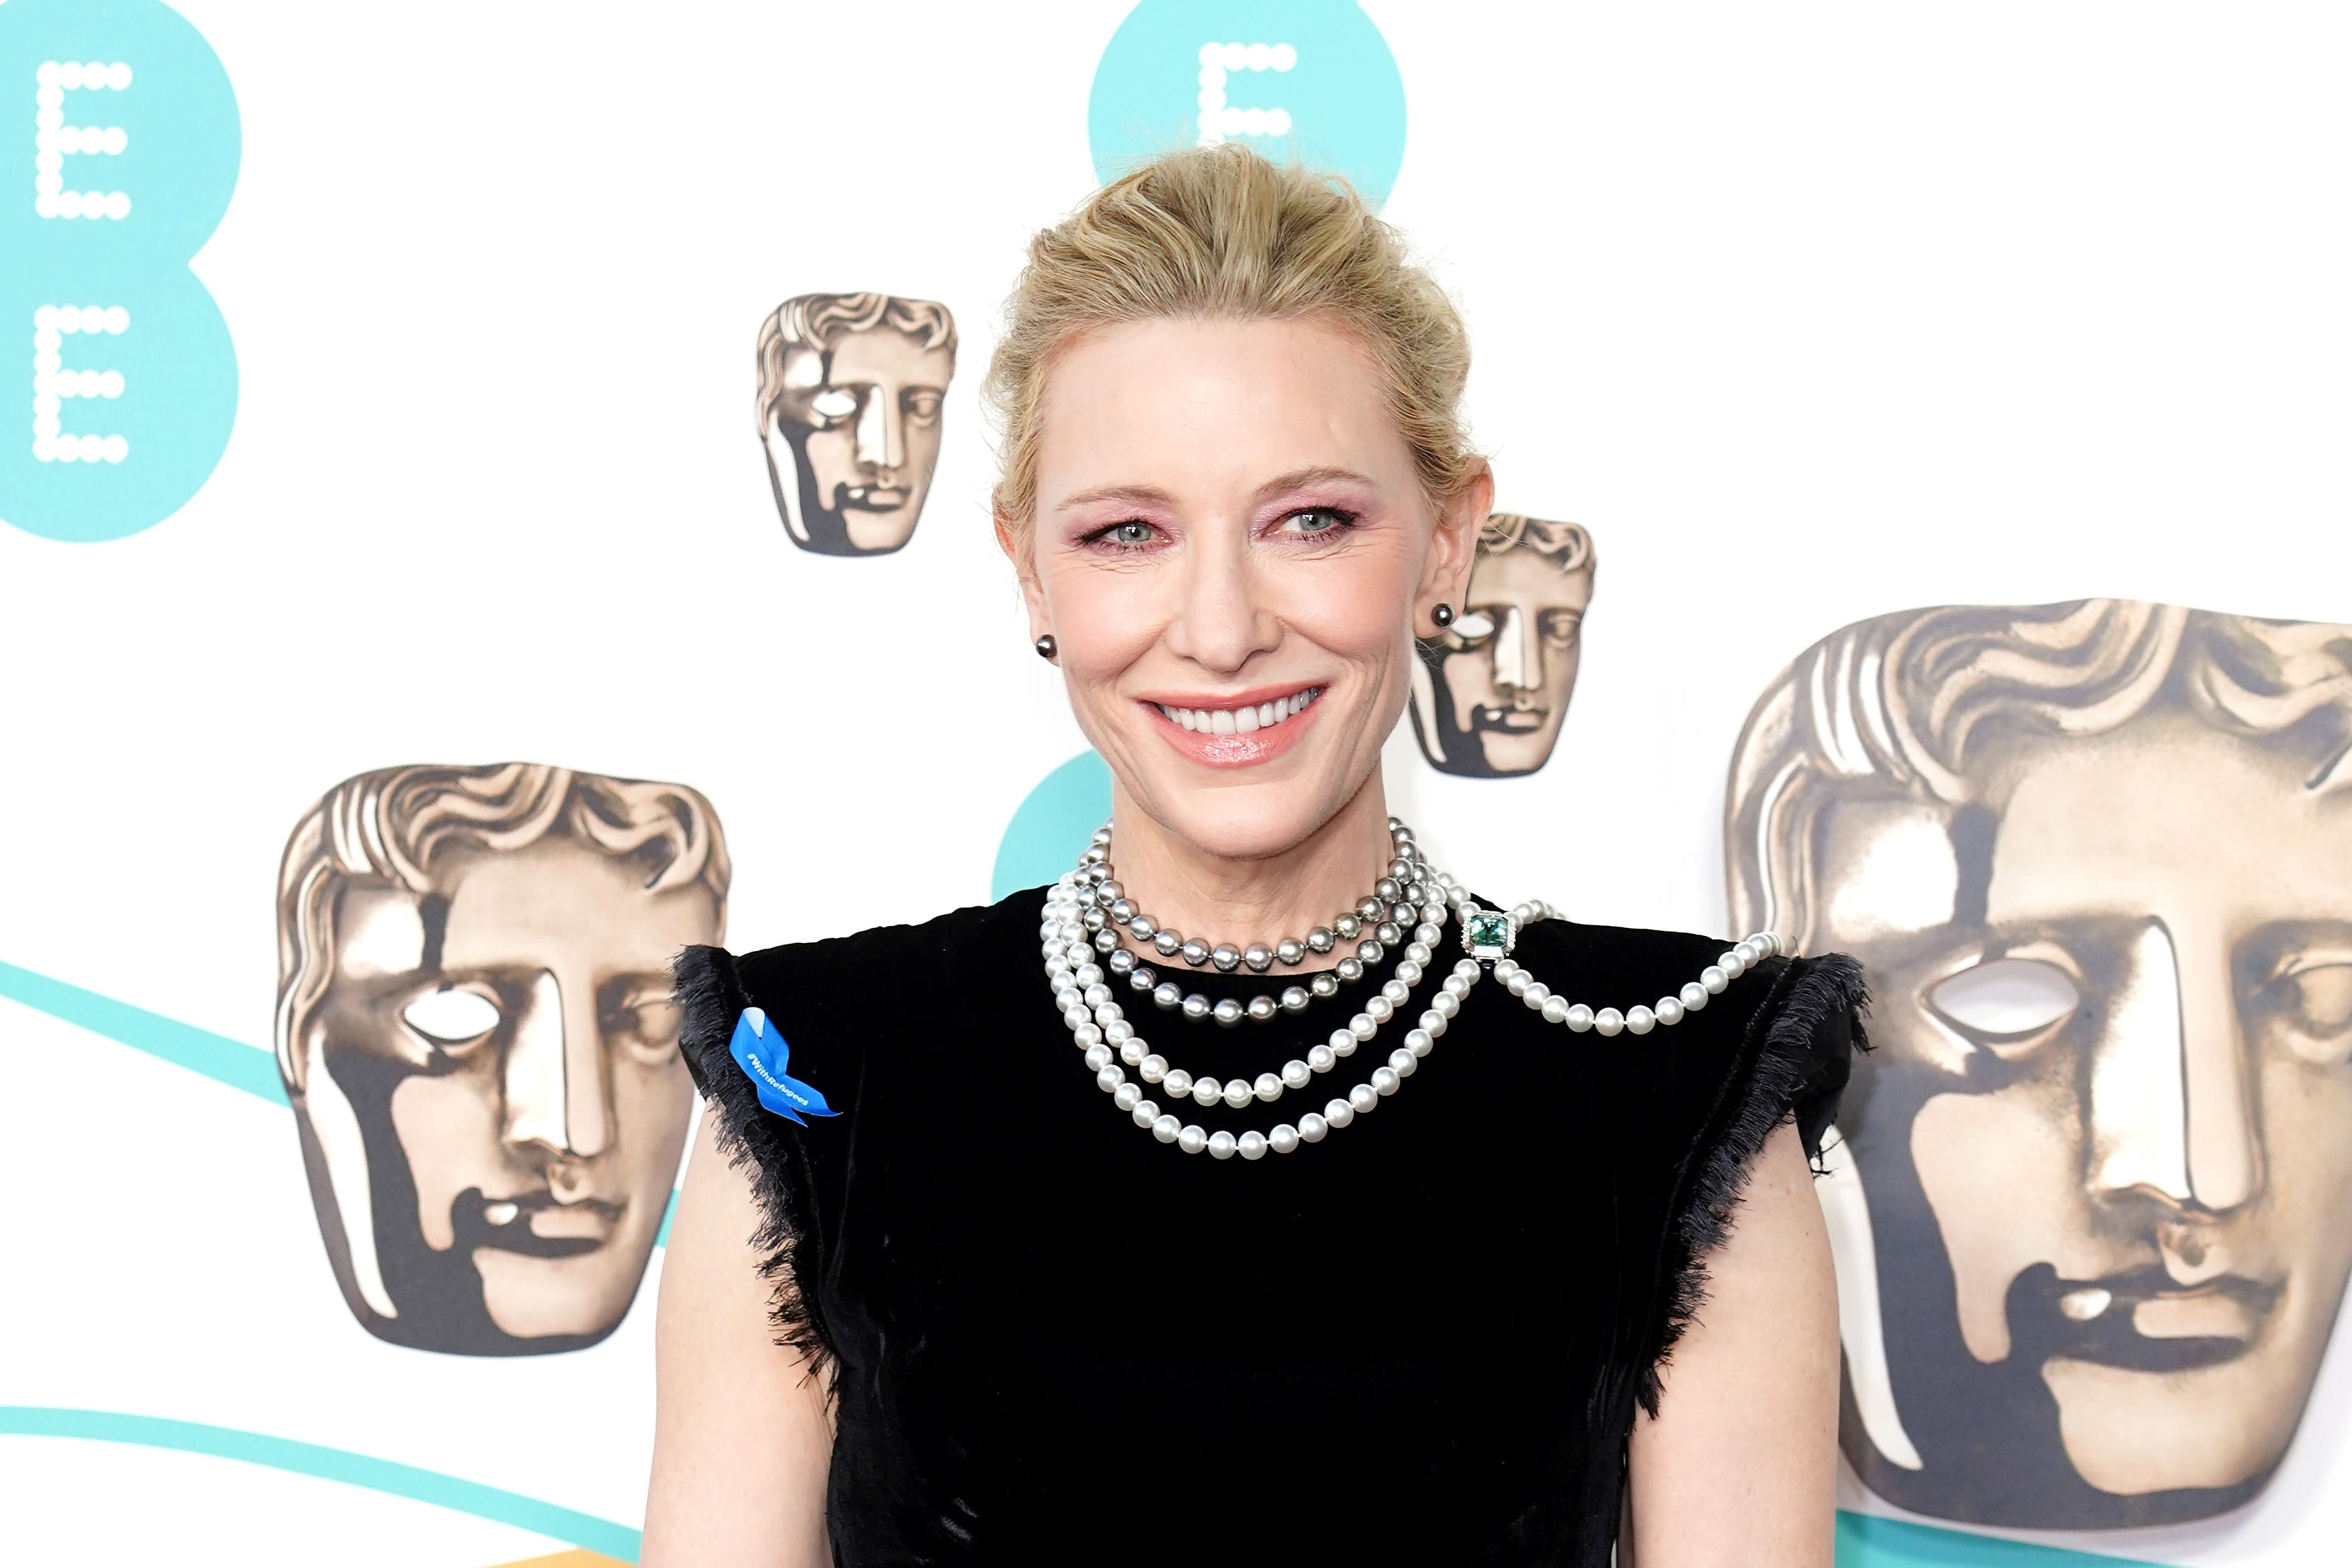 Glastonbury crowds given ‘special treat’ as Cate Blanchett joins Sparks